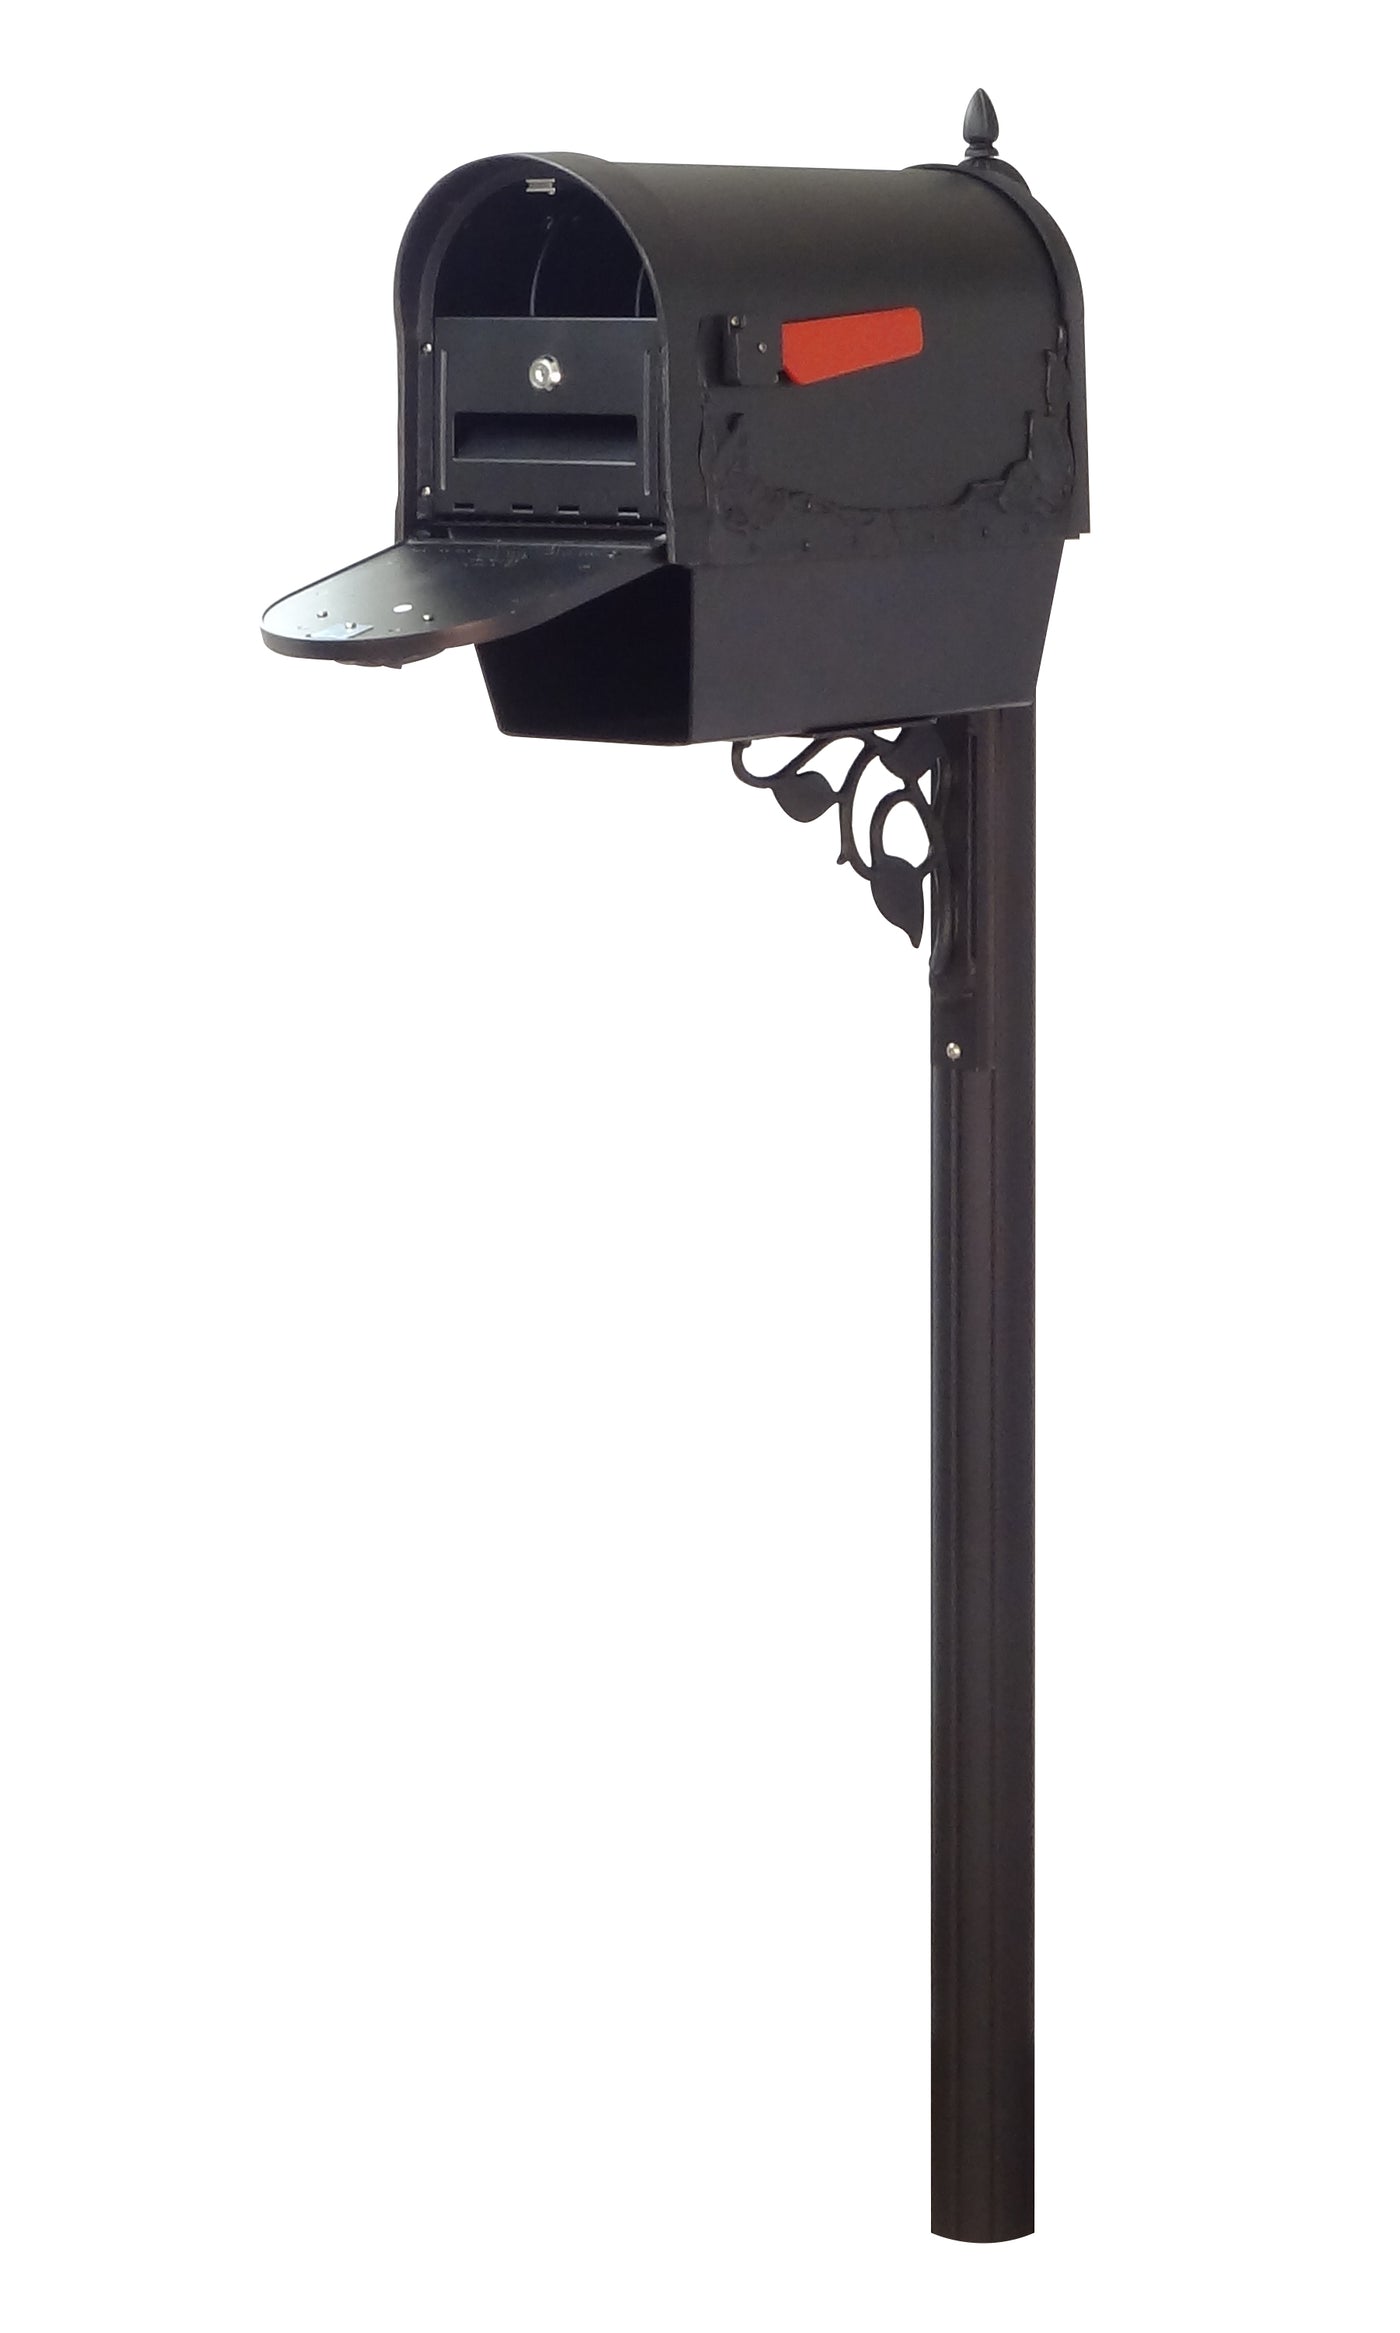 Floral Curbside Mailbox with Newspaper Tube, Locking Insert and Albion Mailbox Post